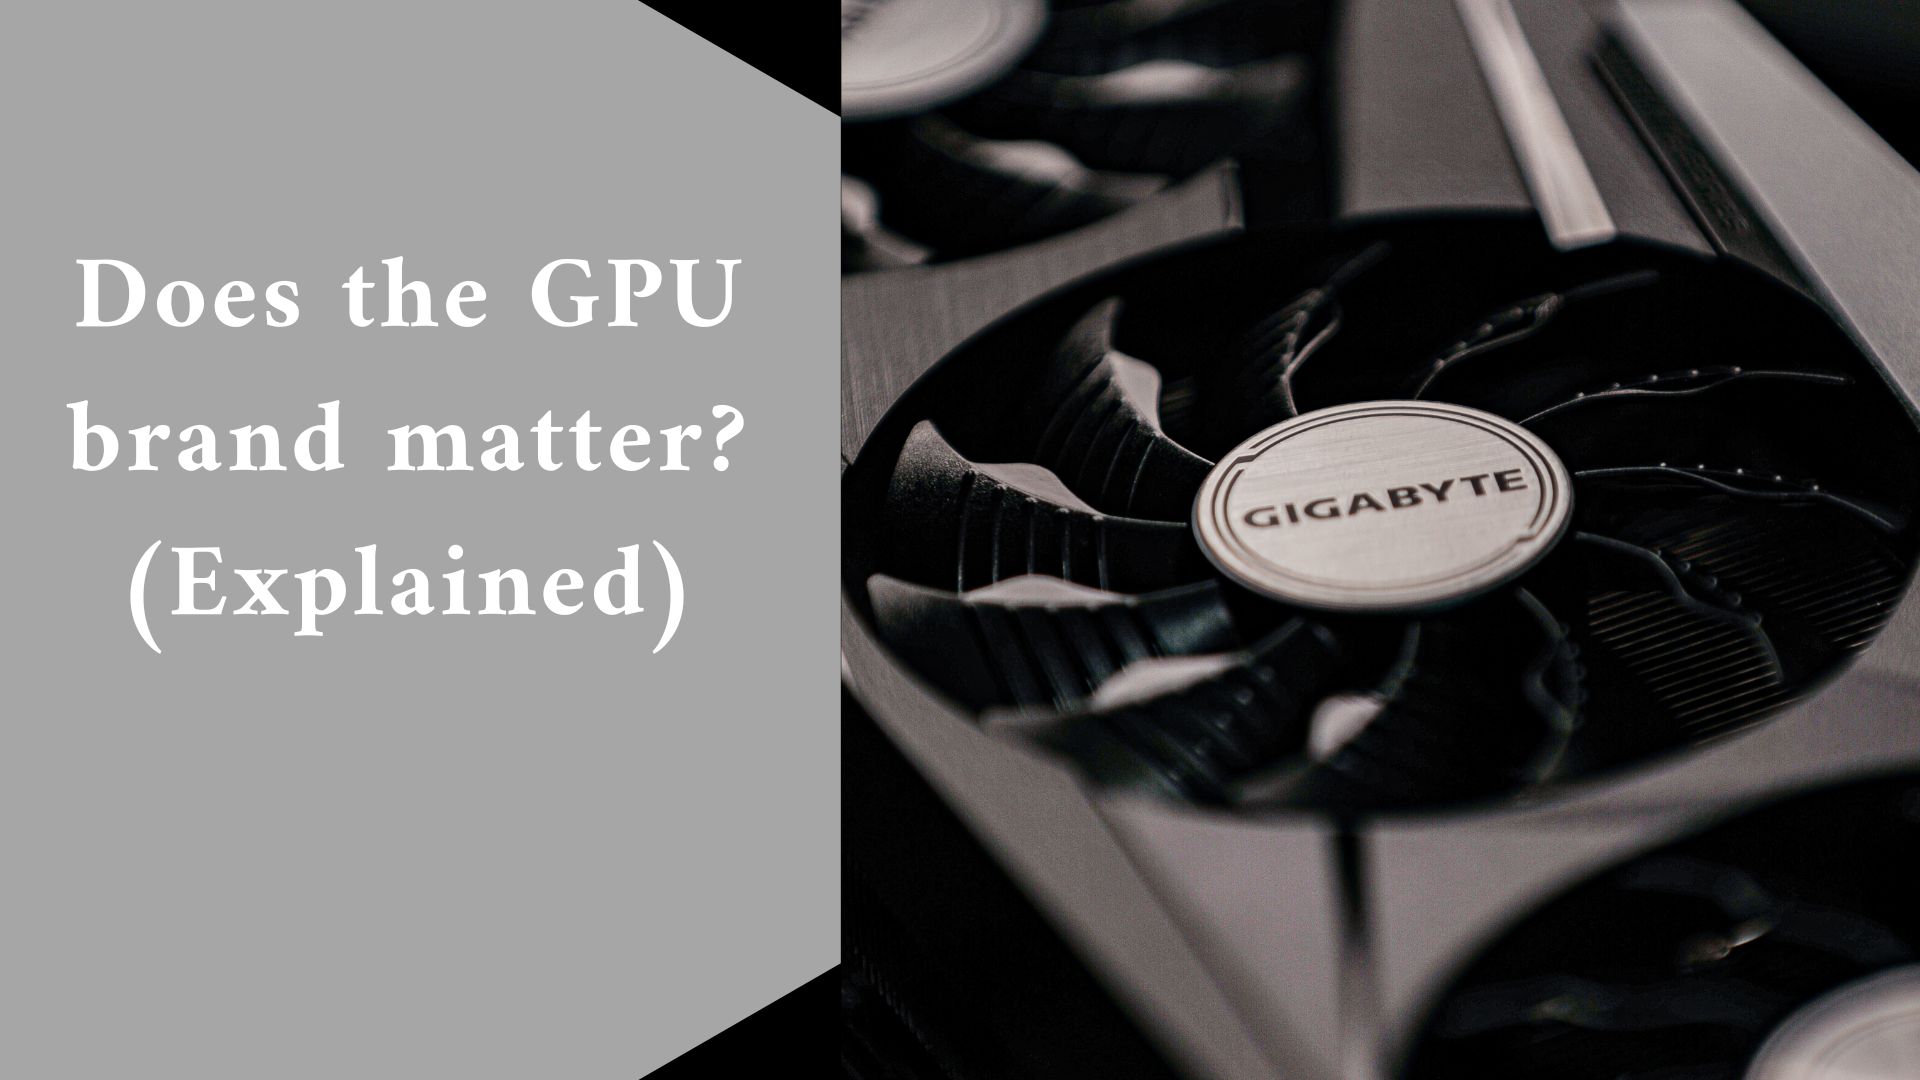 Does the GPU brand matter? (Explained)